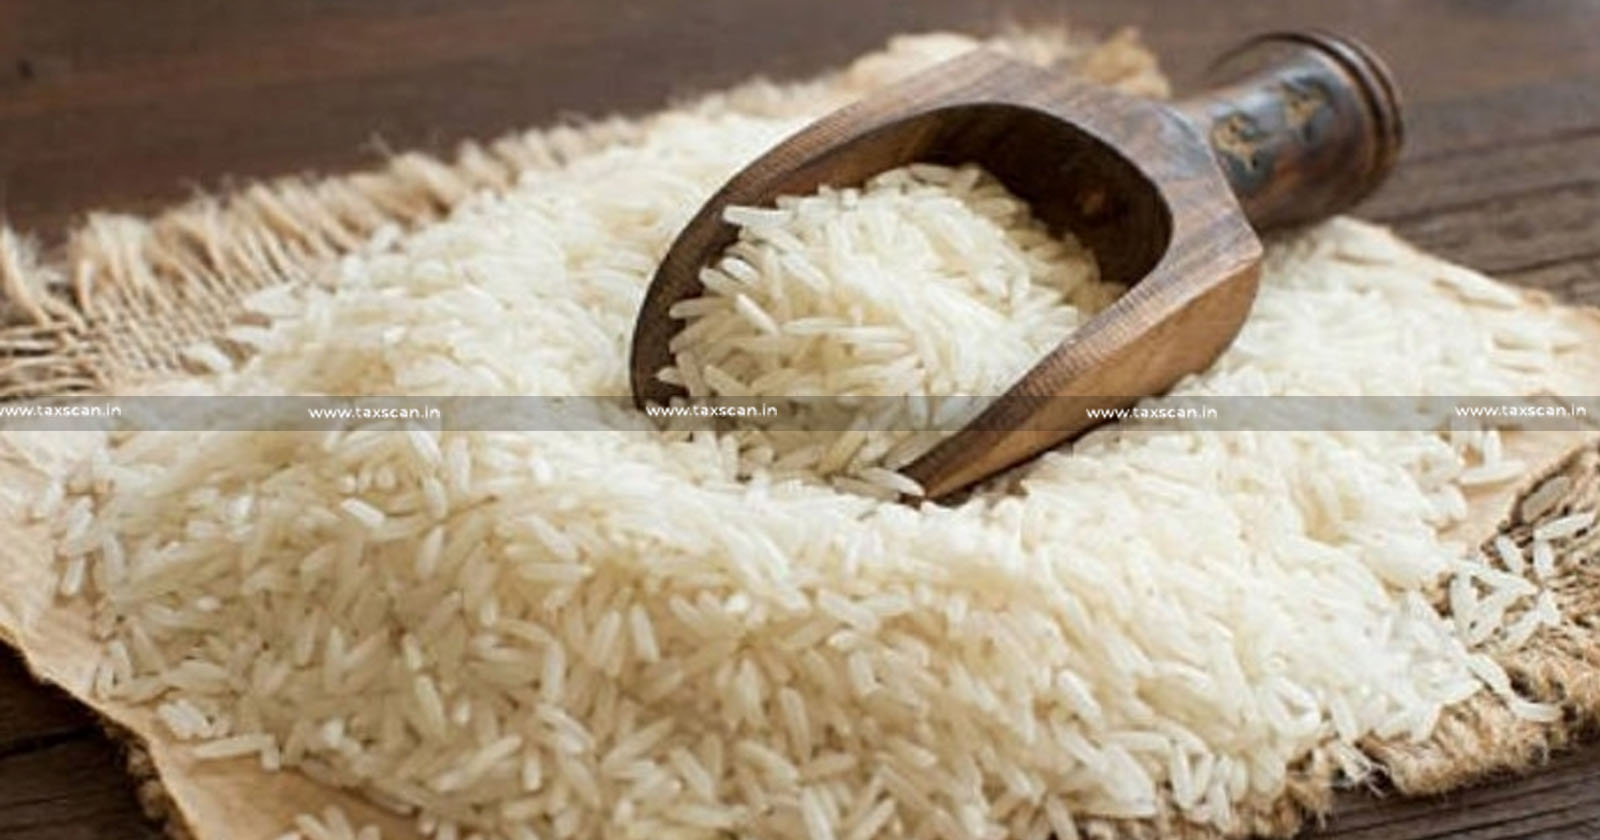 DGFT limited-quantinty export of Non - Basmati White Rice to Bhutan - Mauritius and Singapore - TAXSCAN